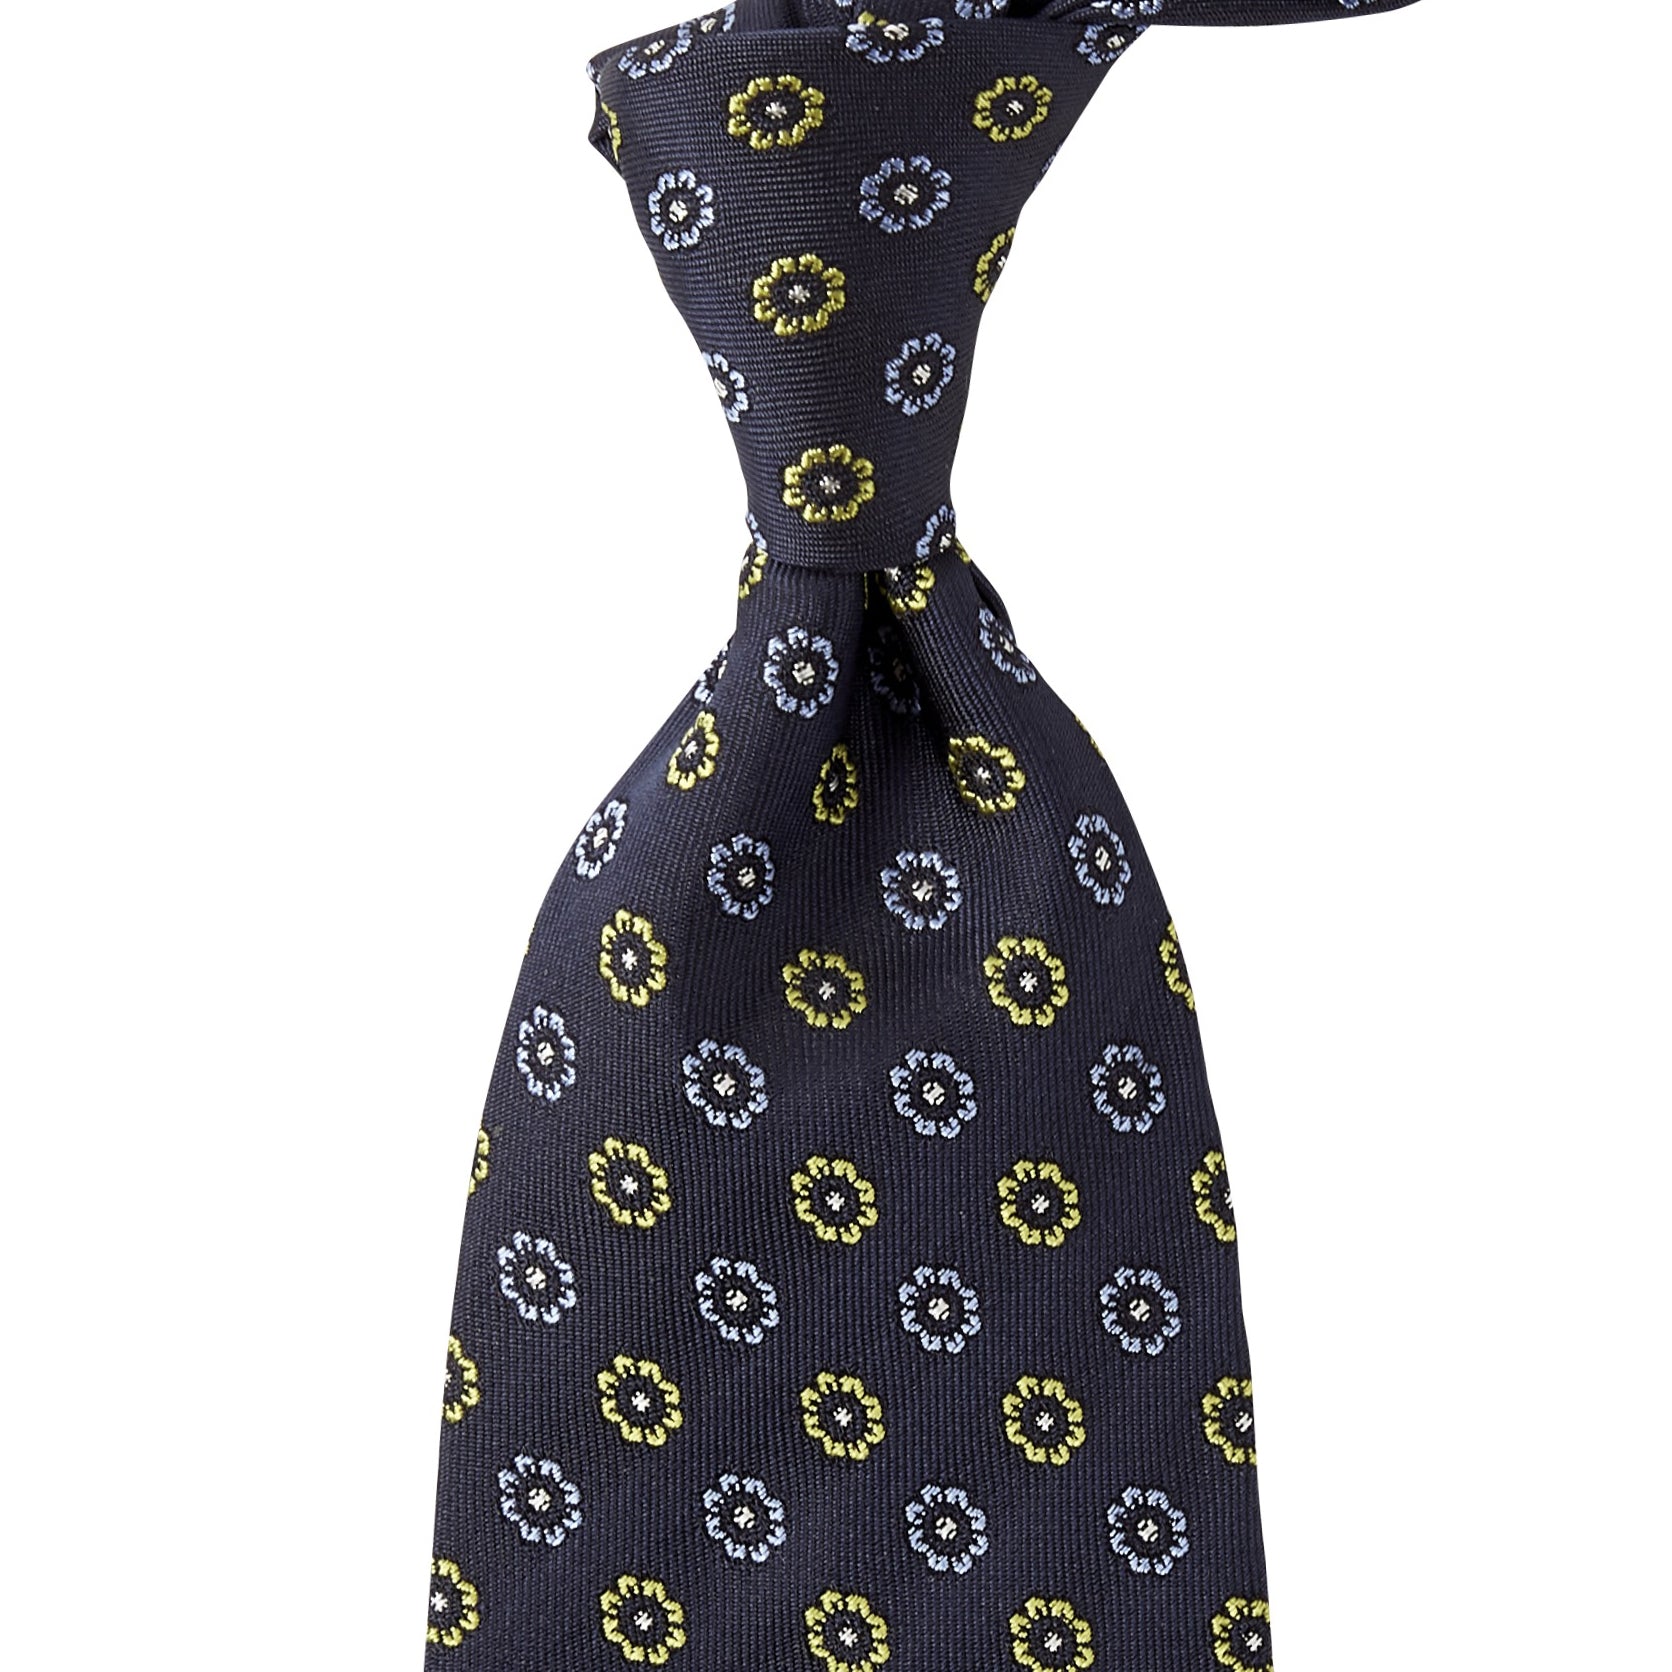 A KirbyAllison.com Sovereign Grade Navy Blue and Lime Jacquard Tie with quality yellow circles on it.